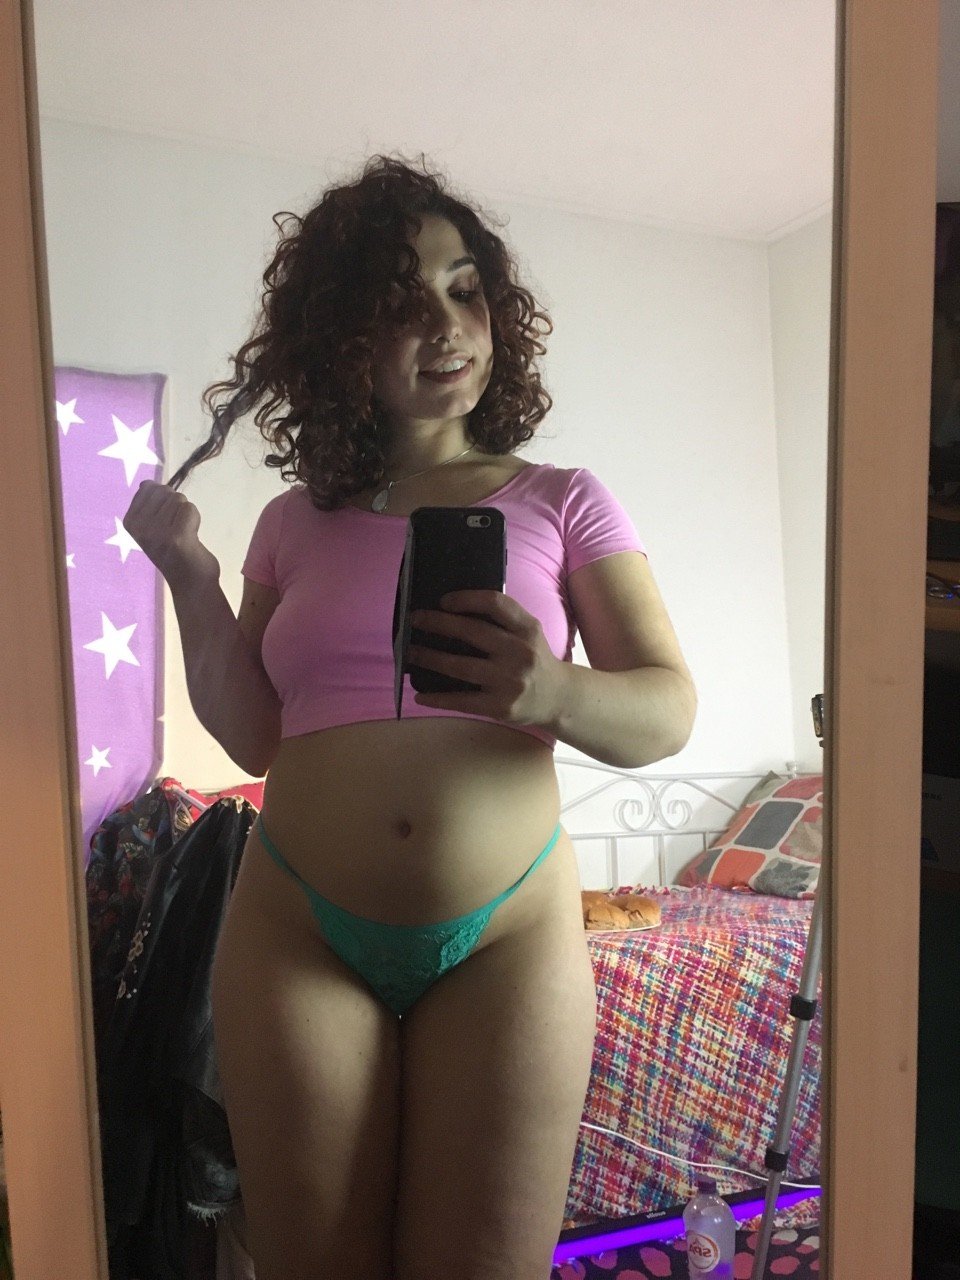 Photo by mariaalive with the username @mariaalive, who is a star user,  September 17, 2017 at 8:33 PM and the text says 'Loving my new gains so far! Finally starting to get a cute soft rounded belly! #bellybutton  #belly  #fat  #chubby  #curvy  #thick  #girl  #thickness  #thick  #thighs  #thick  #fat  #girl  #body  #positive  #curly  #hair  #natural  #gaining  #weight..'